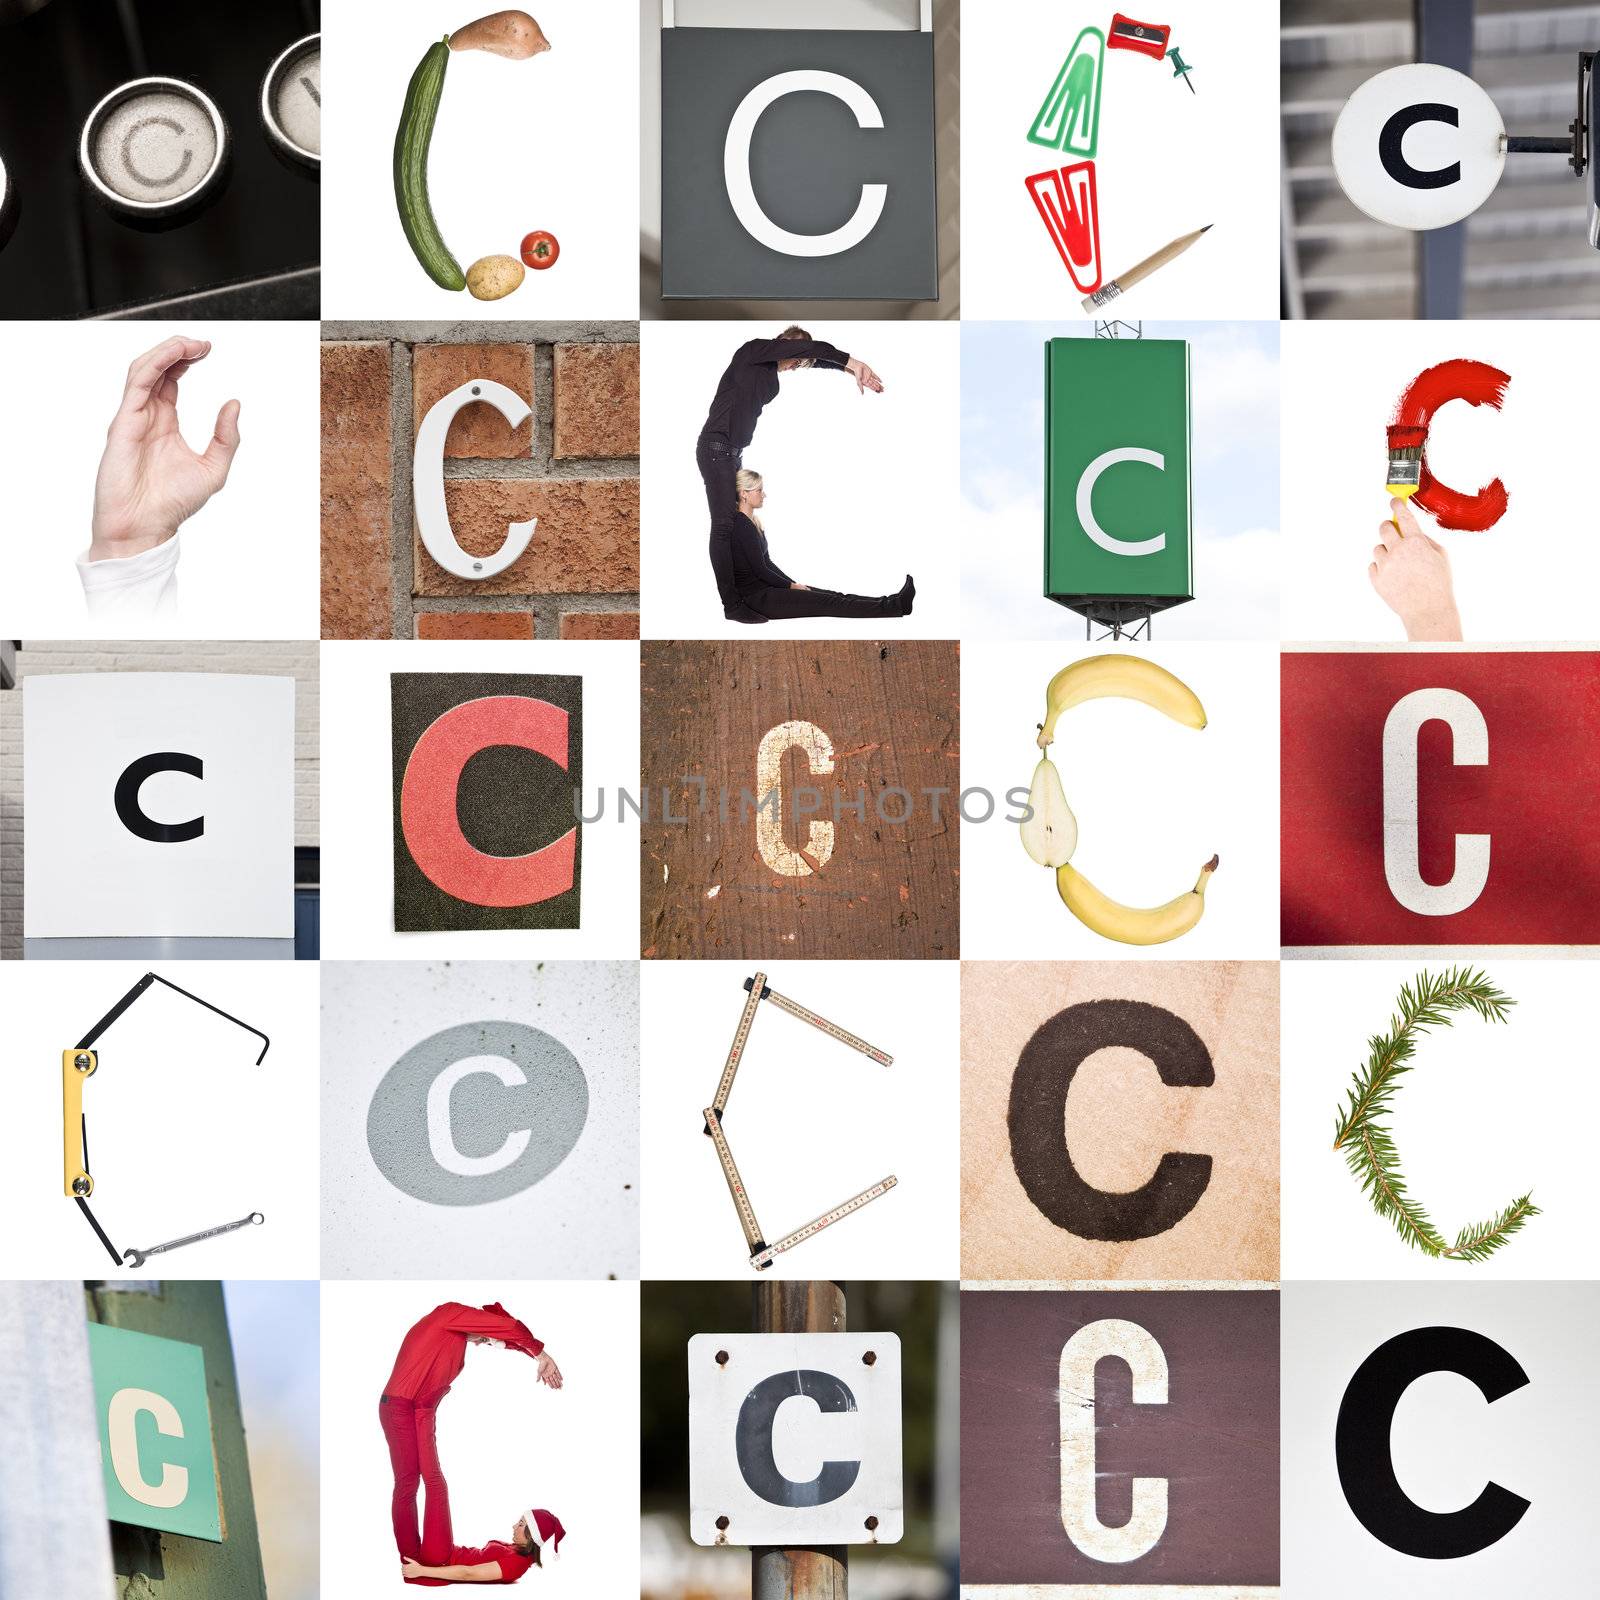 Collage of Letter C by gemenacom